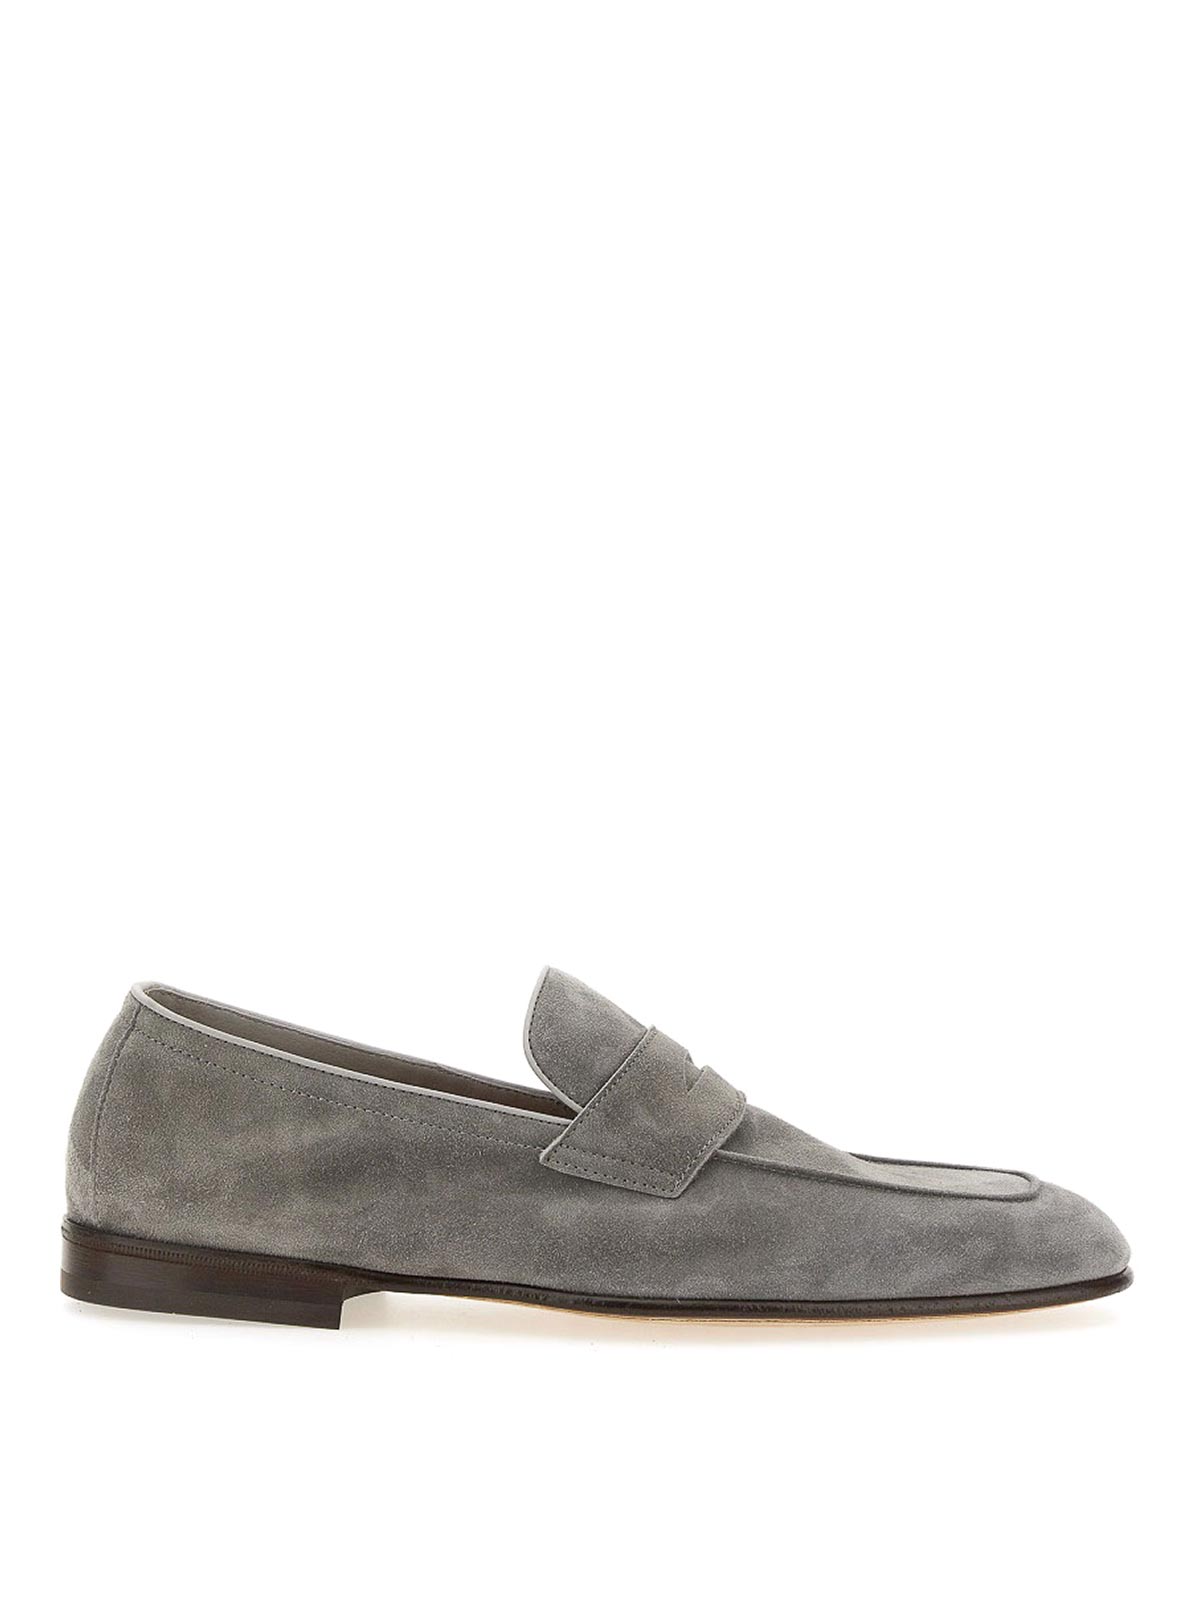 Brunello Cucinelli Penny Loafer In Grey